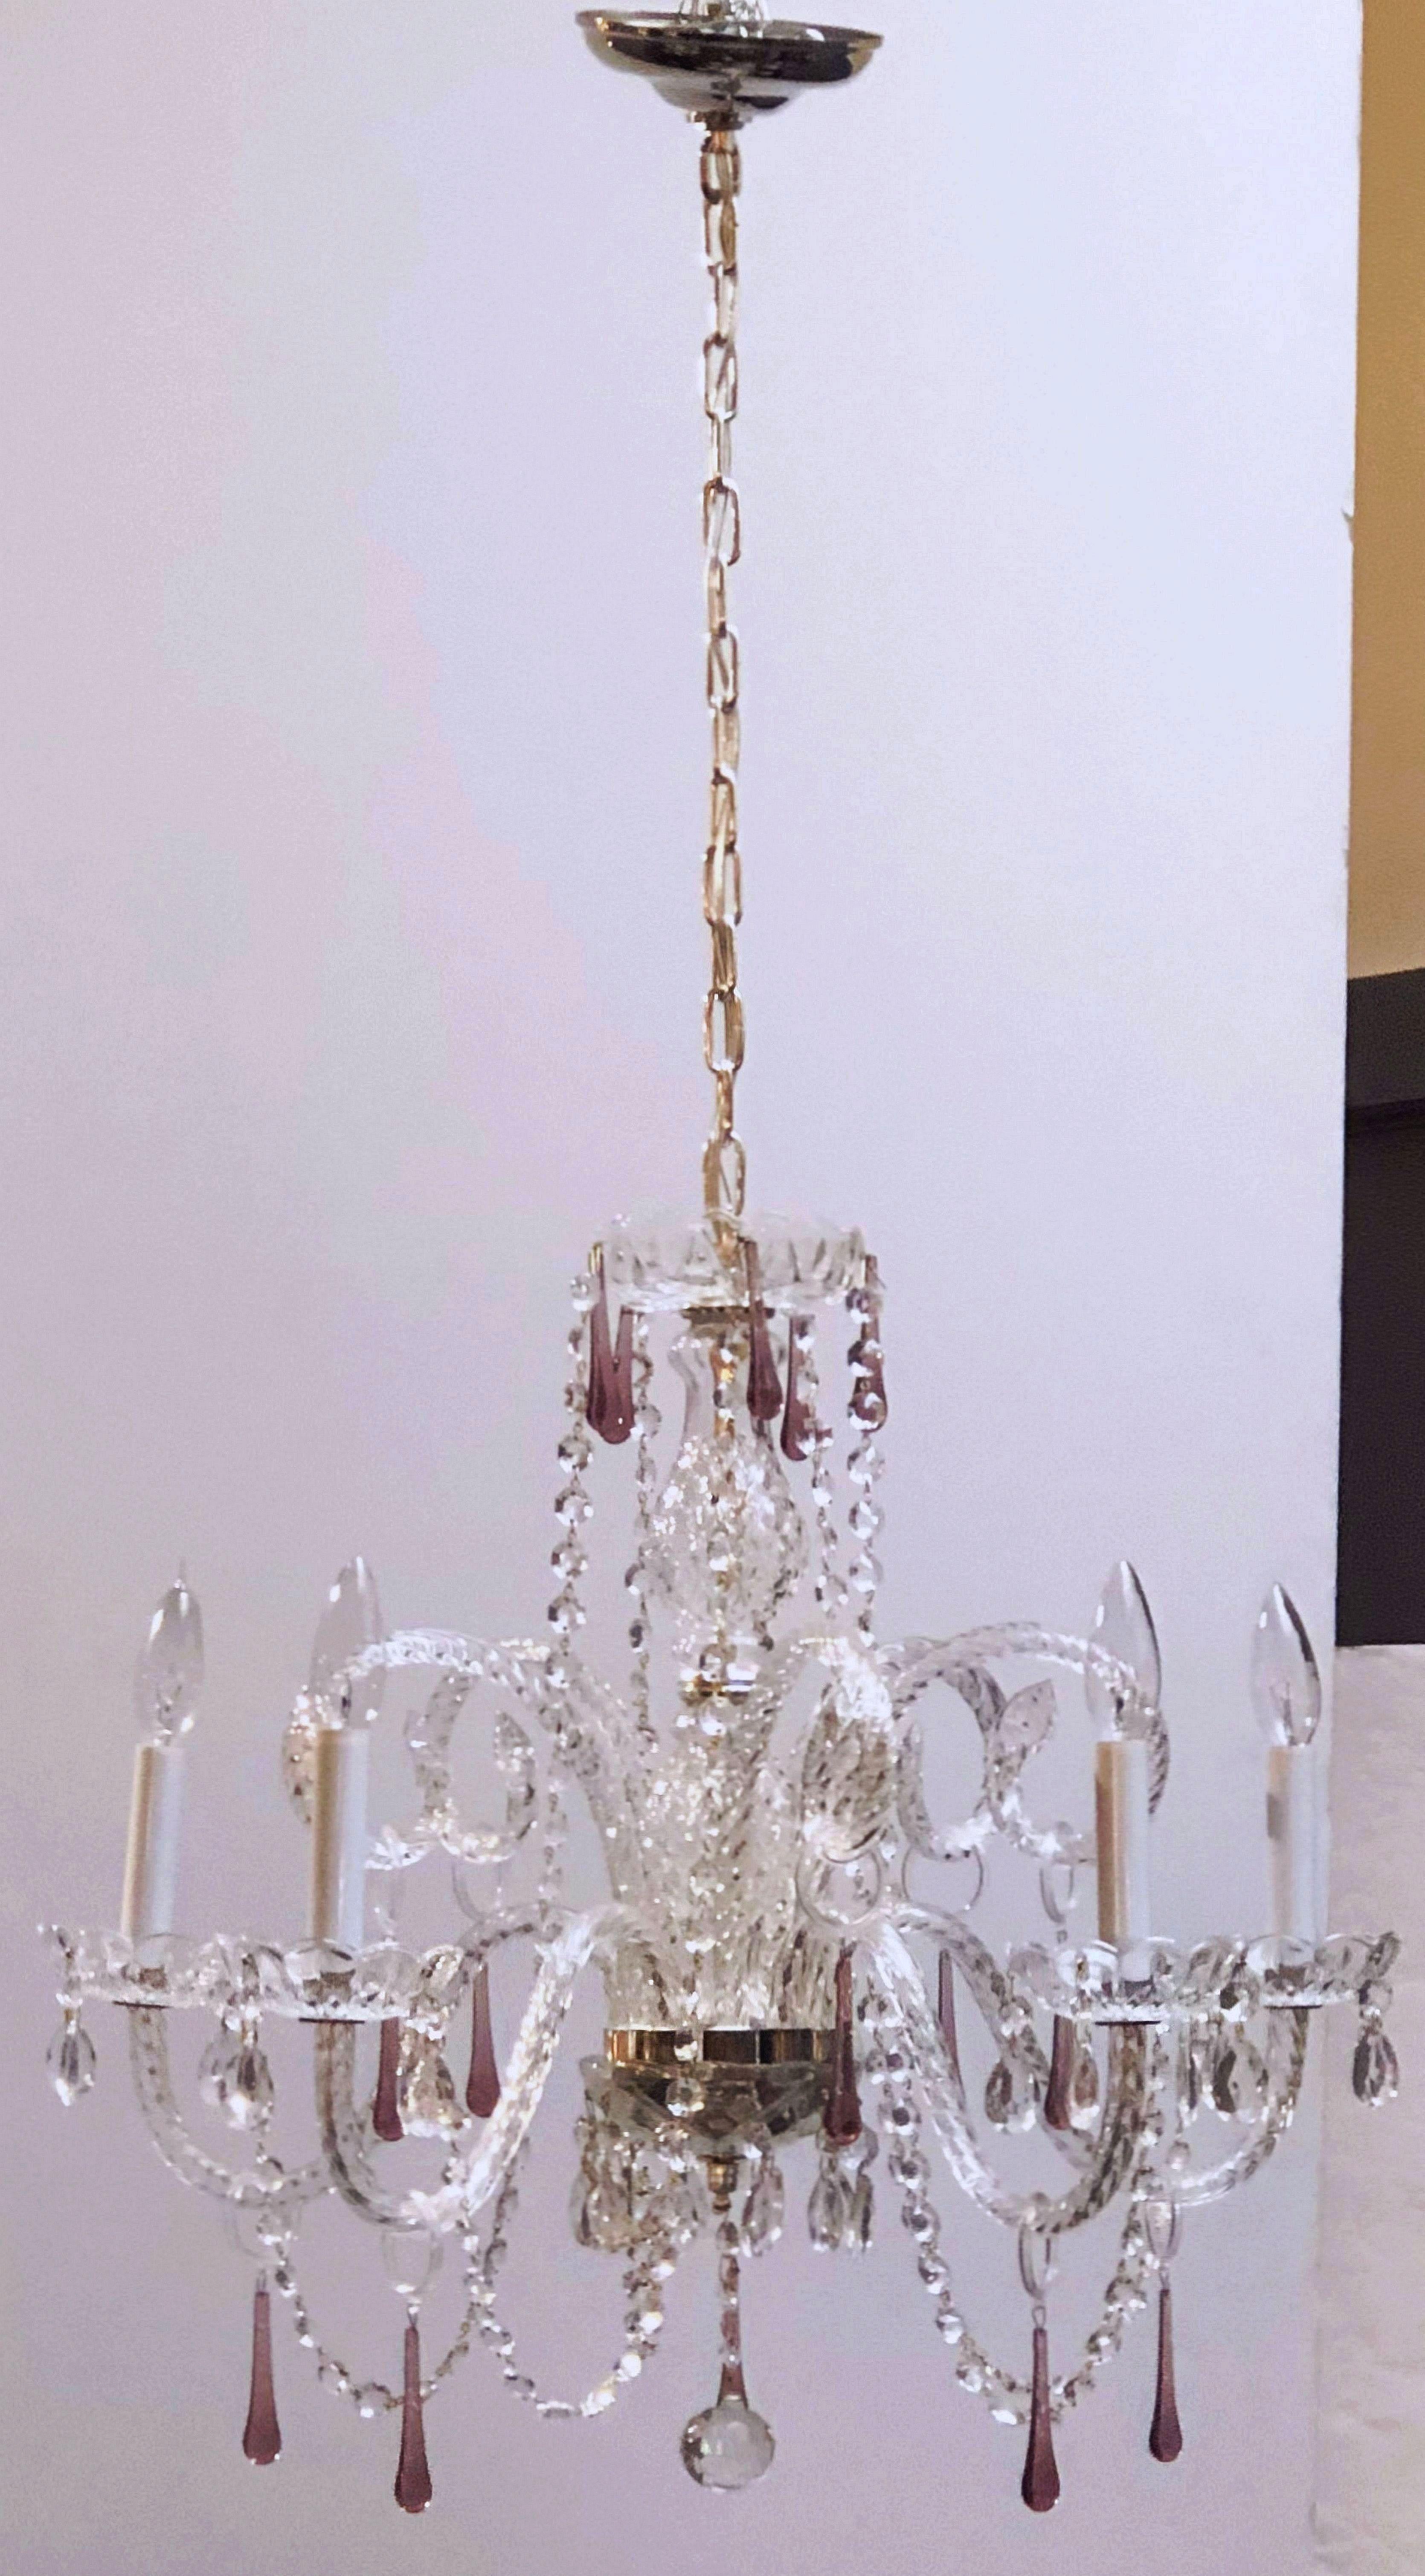 A lovely large Italian five-light chandelier (or hanging fixture) of Venetian crystal, glass, and silver metal, featuring serpentine arms, each candle light with dangling amethyst glass pendants and decorative bobeche.

Measures: 24 inches